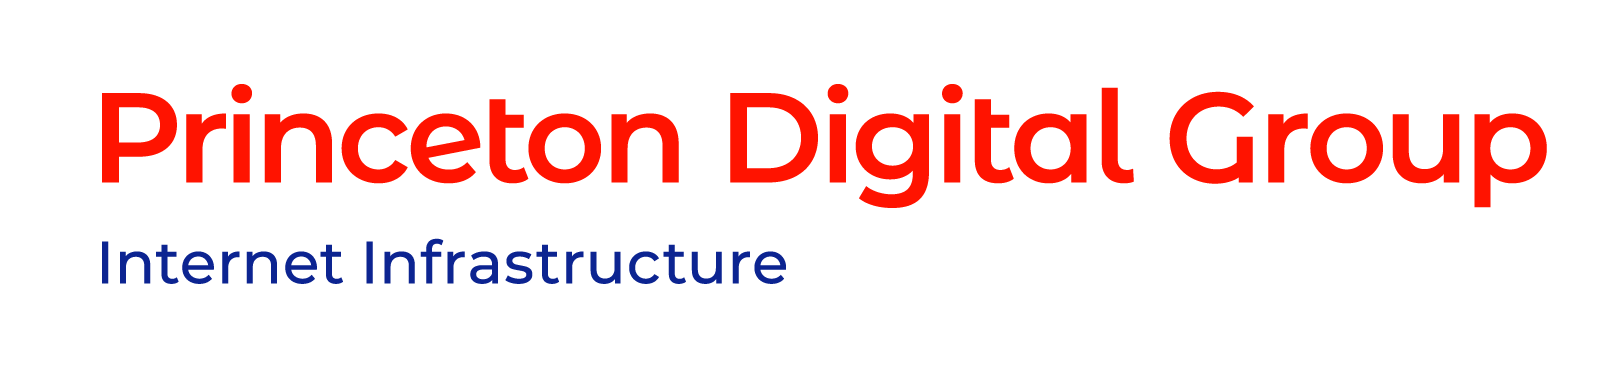 Princeton Digital Group Data Center Services In Asia Pacific